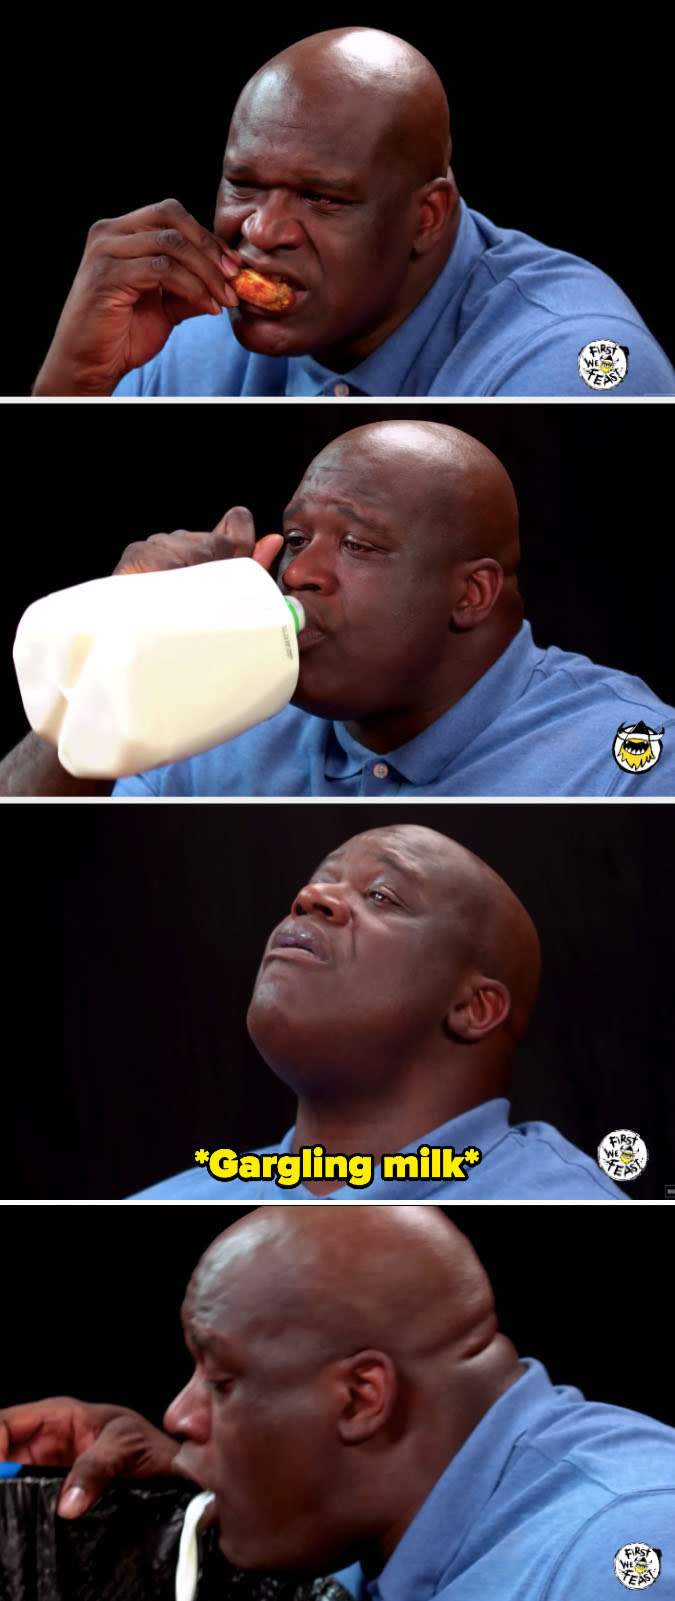 Shaq drinking, gargling, and spitting out milk